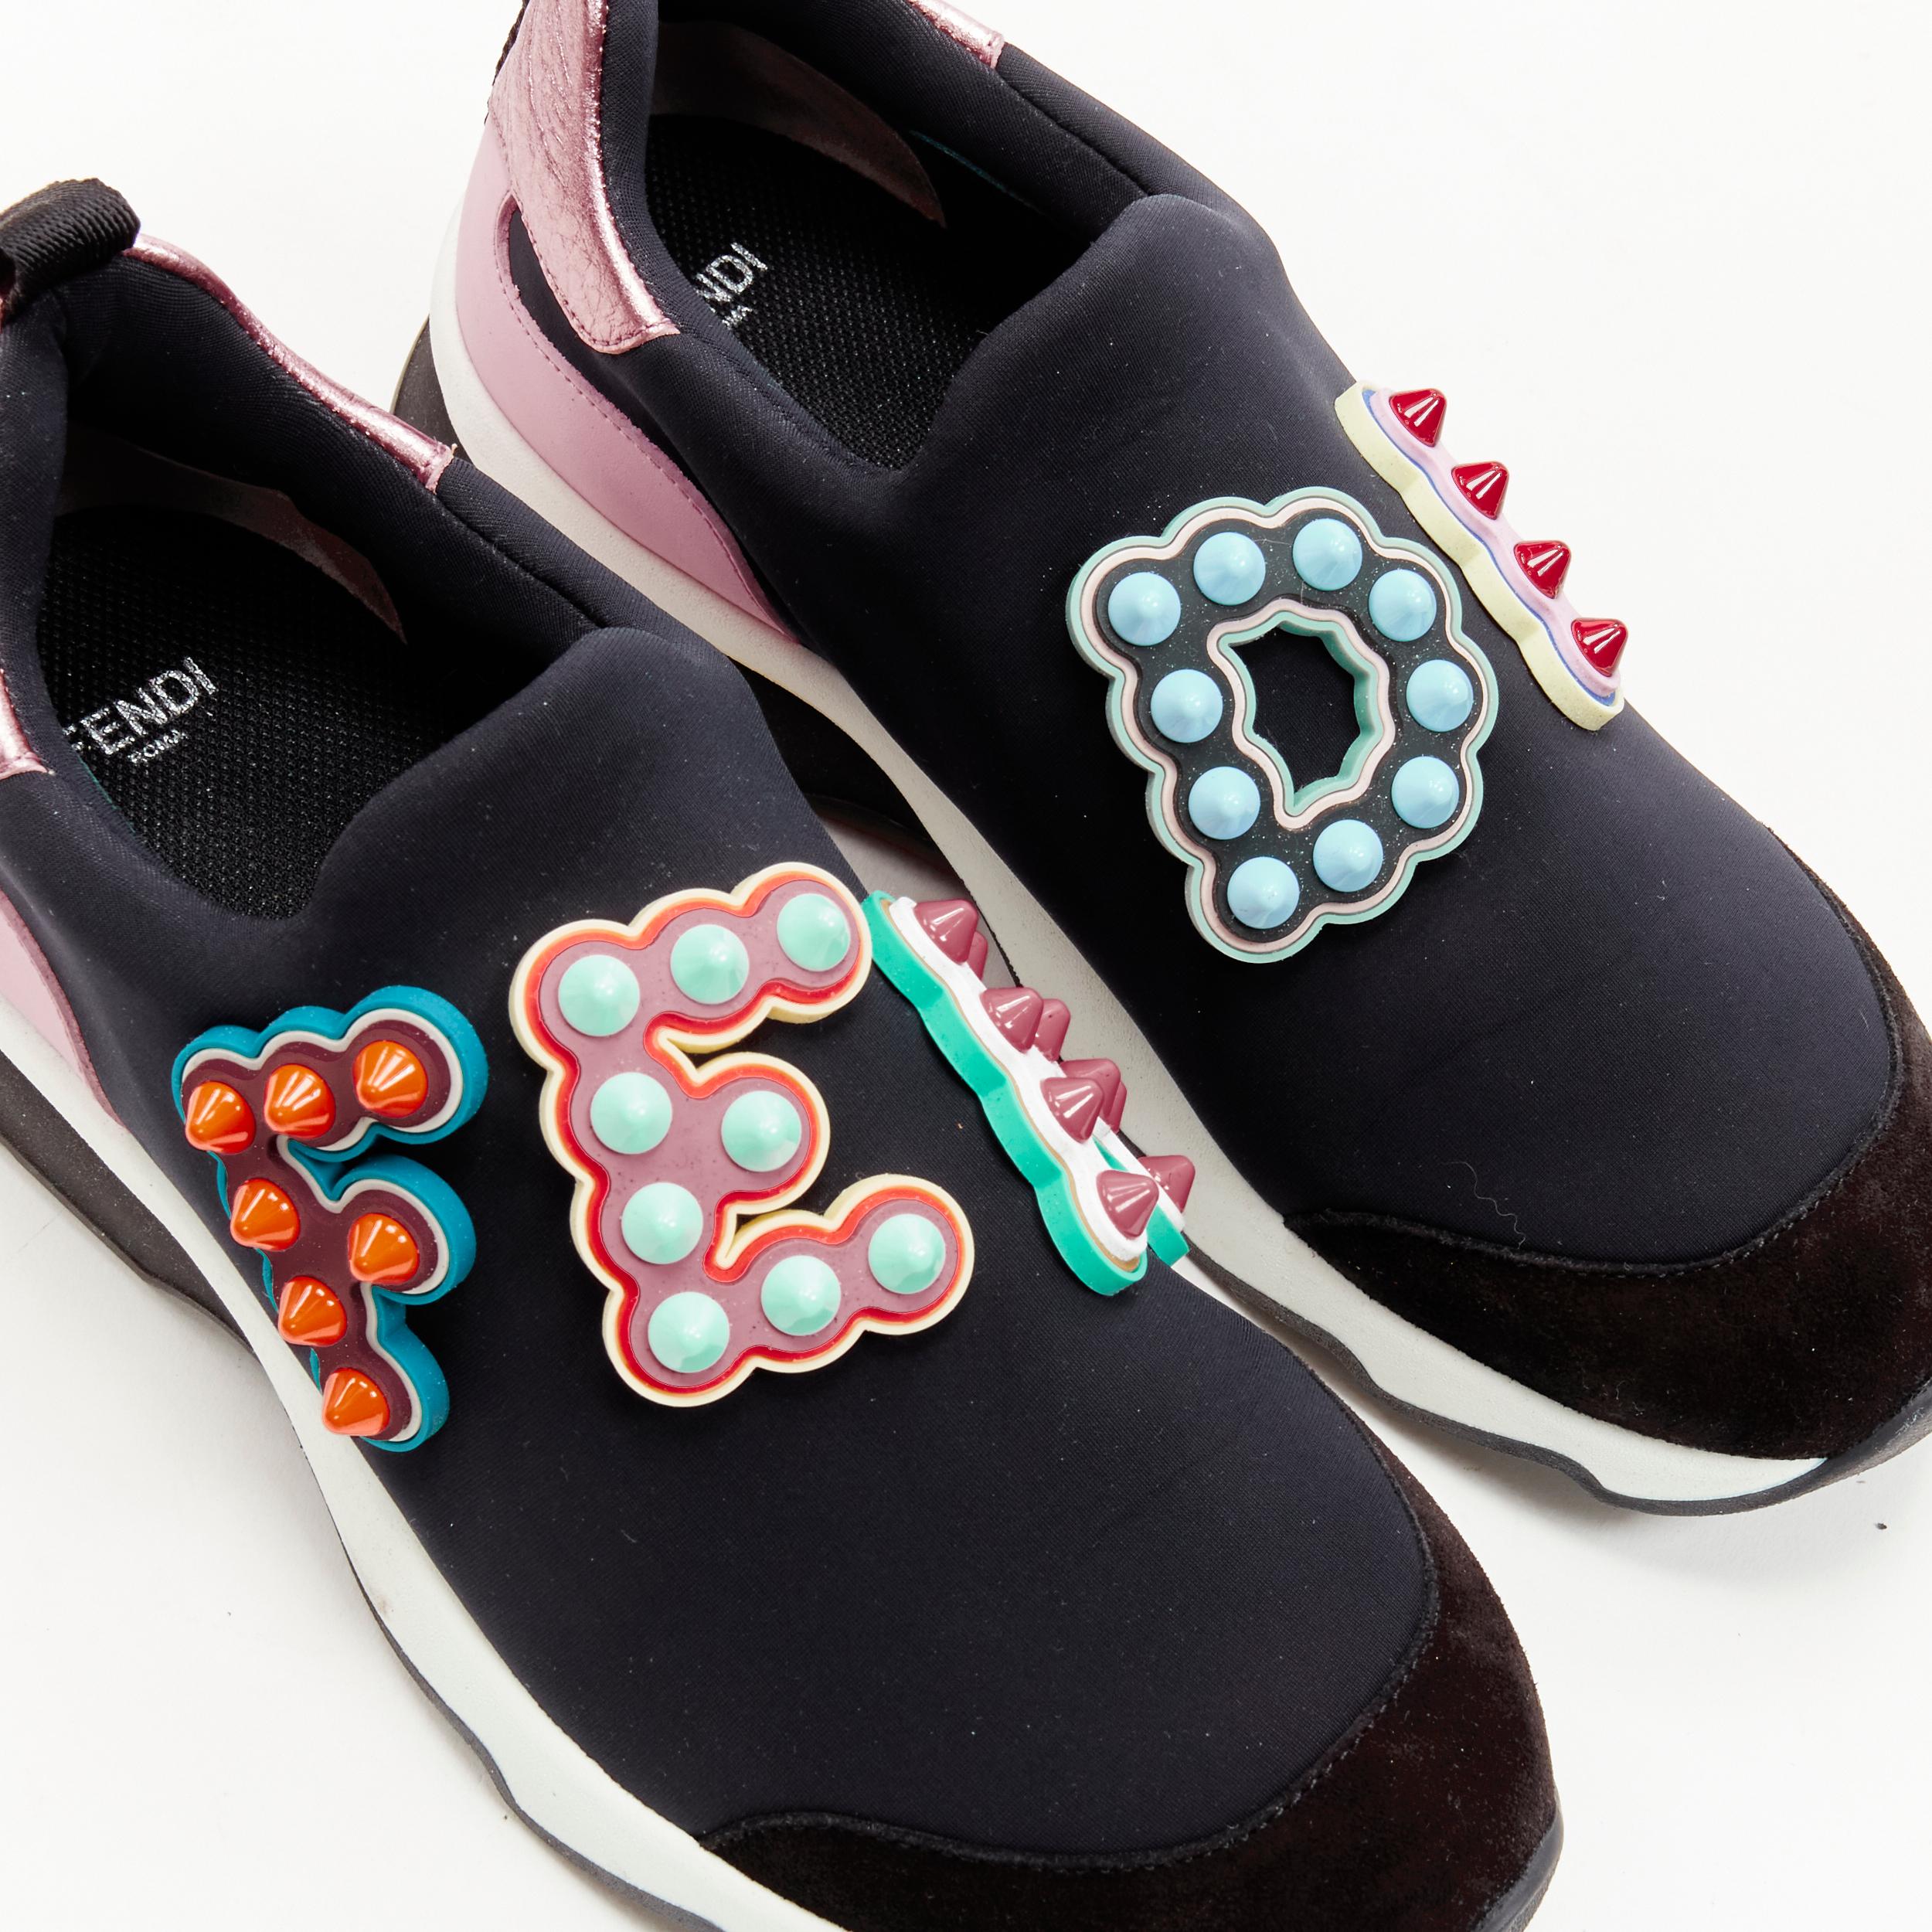 FENDI Fun Fair studded logo rubber applique black pink neoprene low sneaker EU36 
Reference: ANWU/A00358 
Brand: Fendi 
Collection: Fun Fair 
Material: Neoprene 
Color: Black 
Pattern: Solid 
Extra Detail: Neoprene upper with metallic leather trim